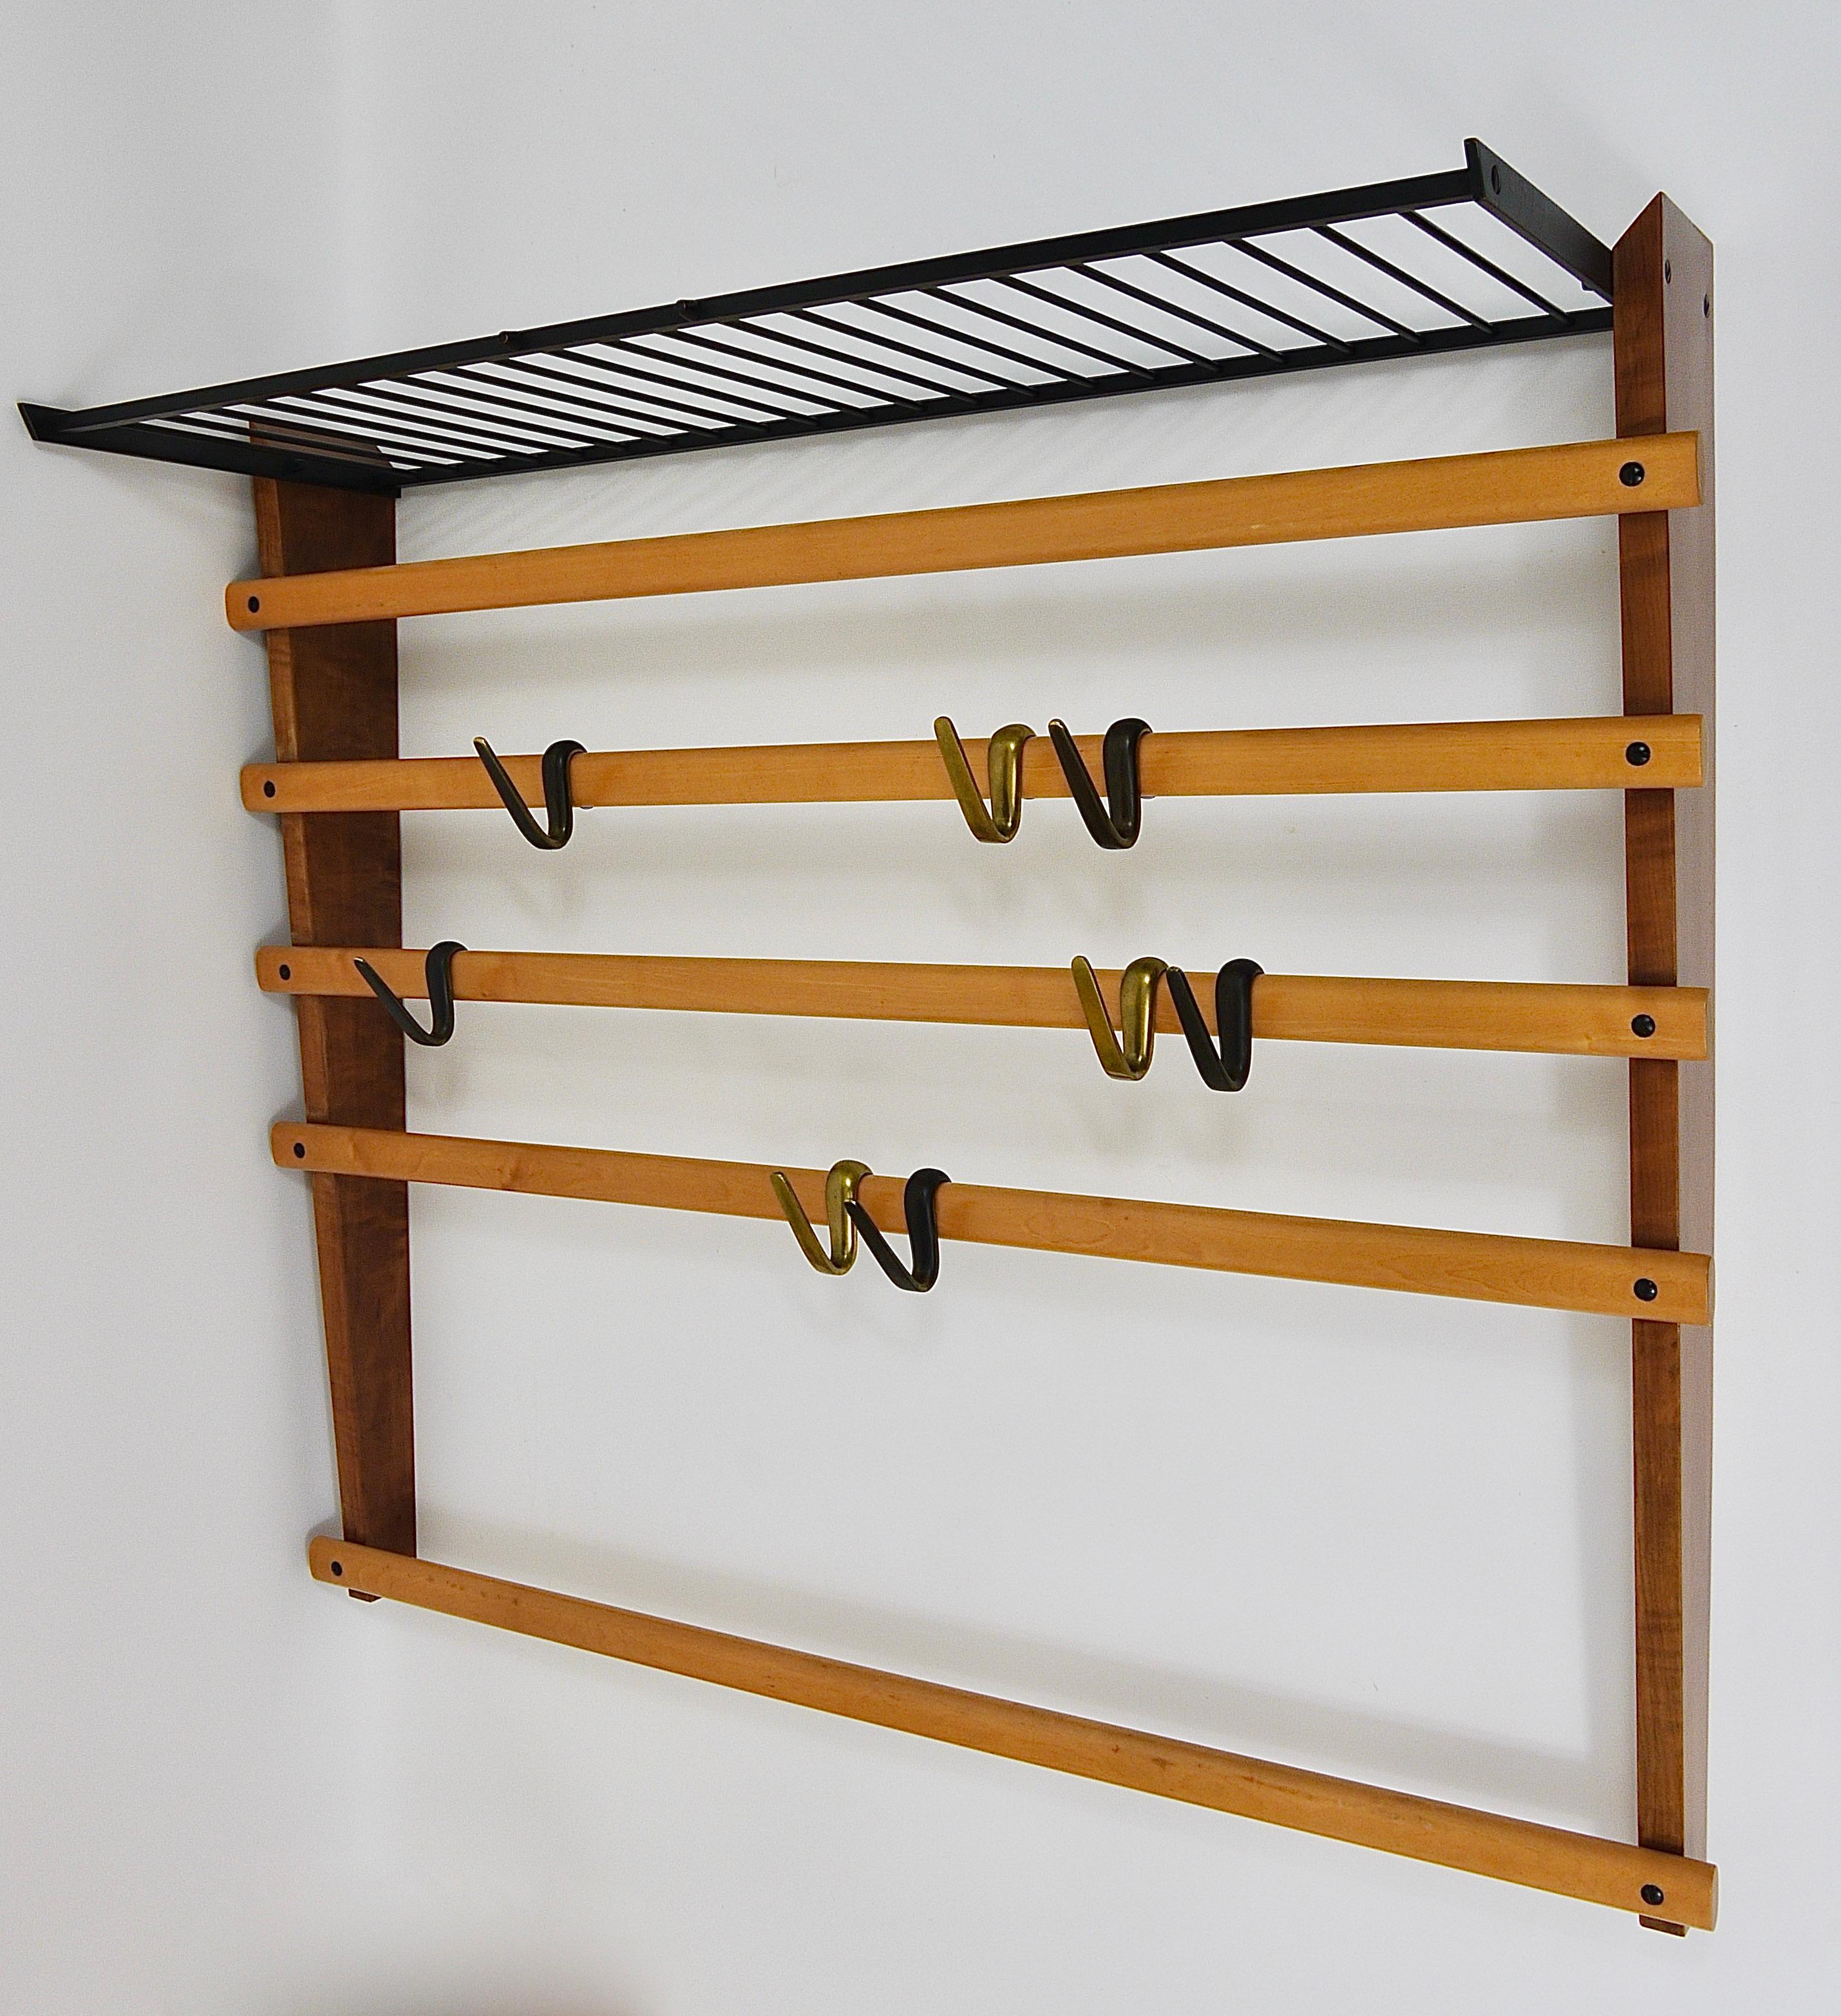 An elegant modernist wall-mounted coat rack from the 1950s. An original and old vintage object, designed and executed by the Austrian architect and designer Carl Auböck. This is a unique version, which has an additional integrated hat rack. This is